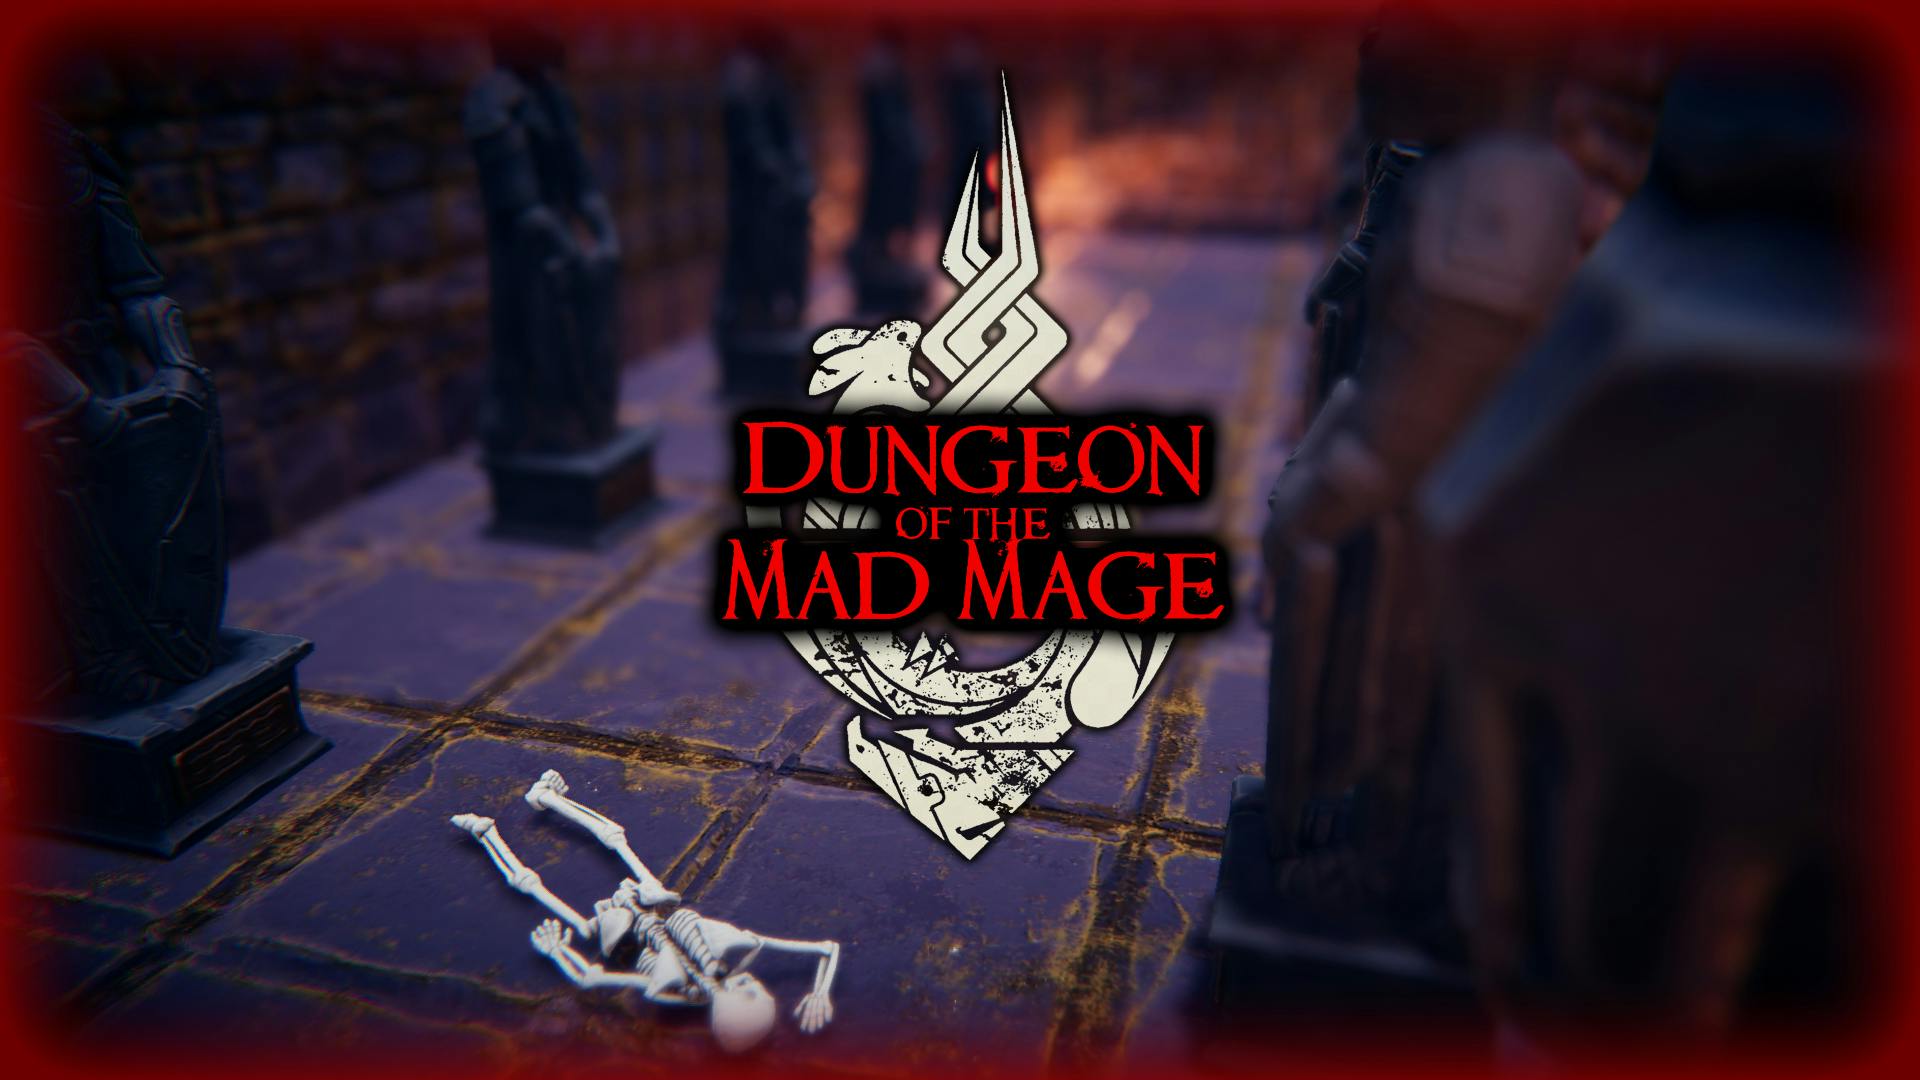 Waterdeep: Dungeon of the Mad Mage - Made in TaleSpire